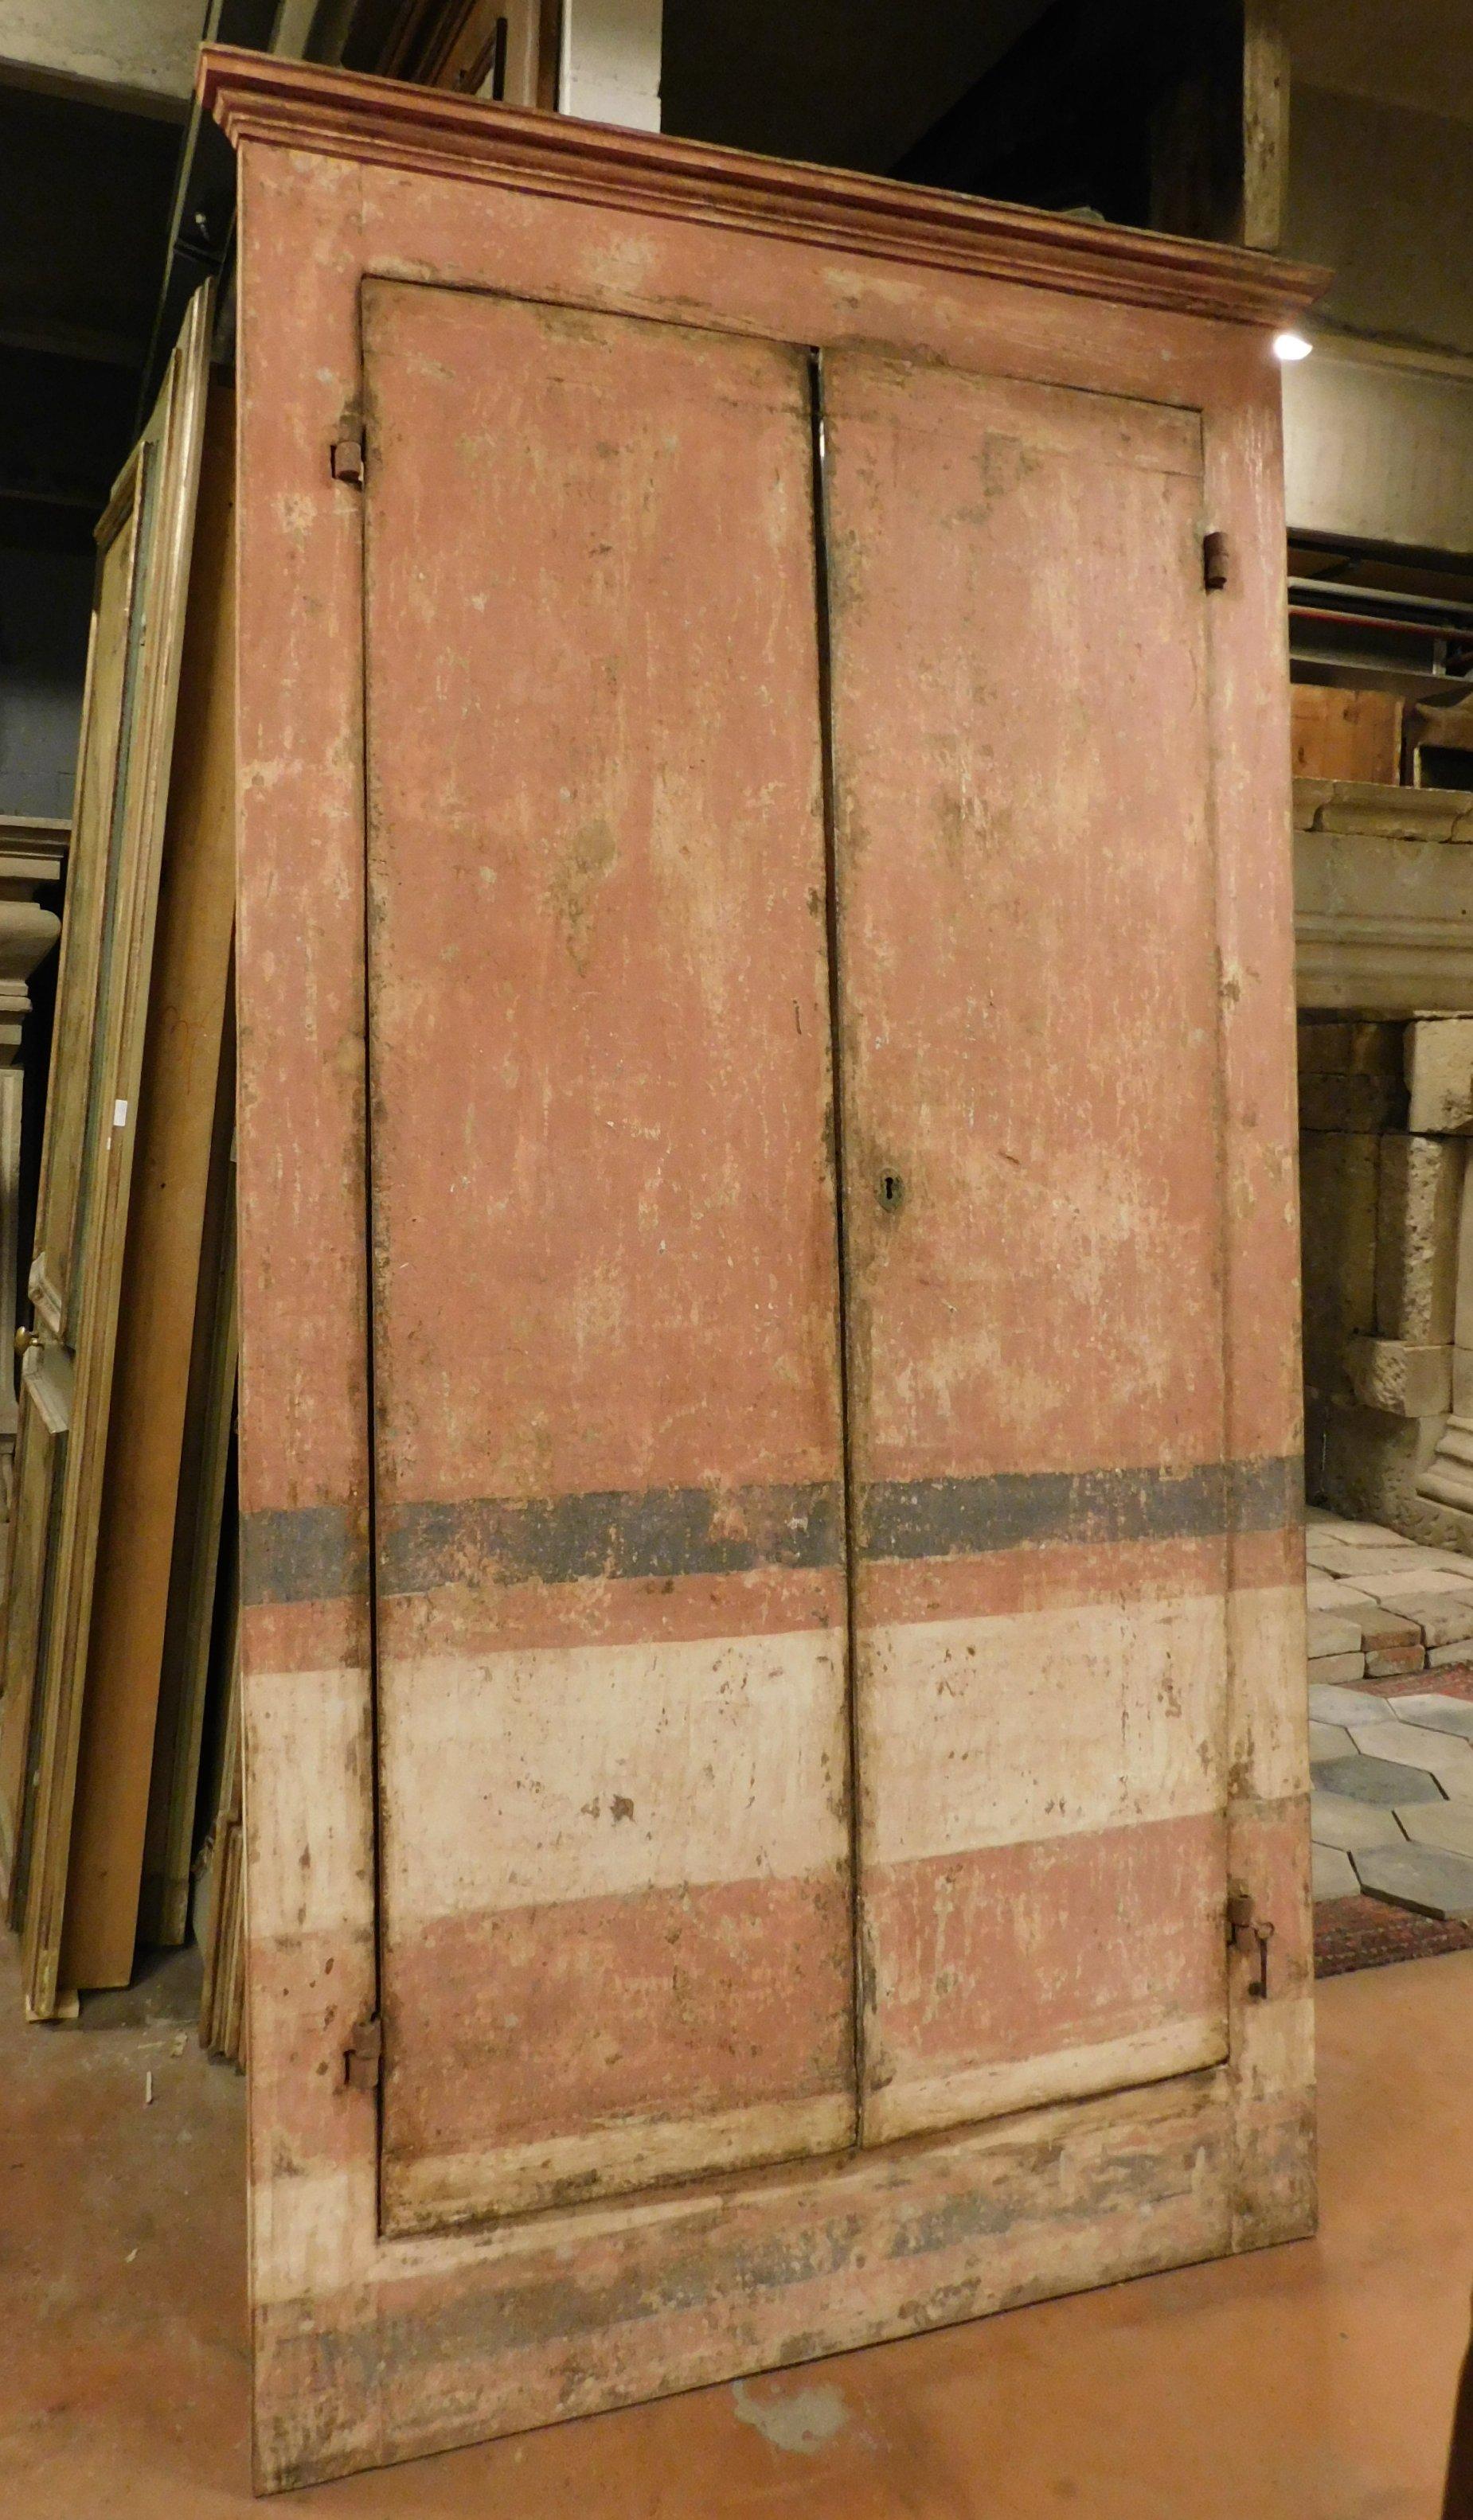 Antique wall cabinet, placard, lacquered cupboard with texture that imitated the upholstery of the house, original painted and patinated both front and back, different texture, built entirely by hand in the 18th century for an important building in